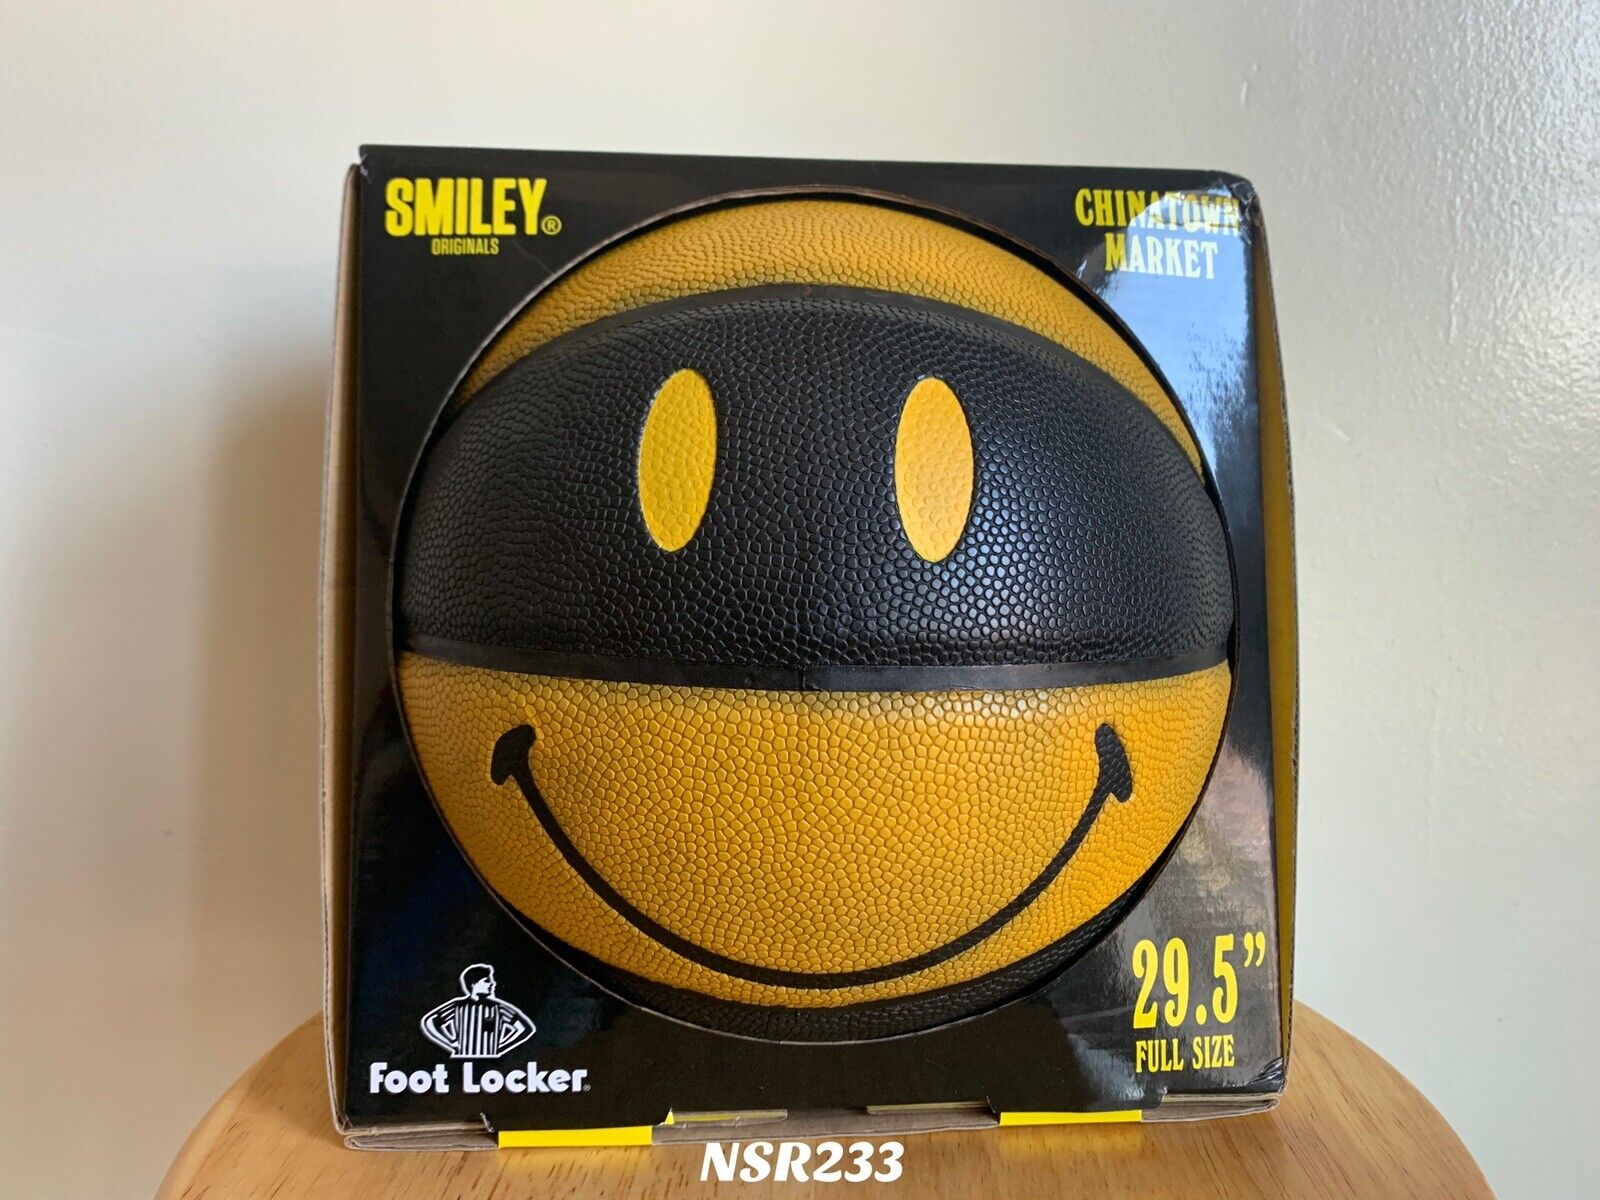 Chinatown Market CTM x Smiley UV Color Changing 29.5/" LIMITED EDITION Basketball